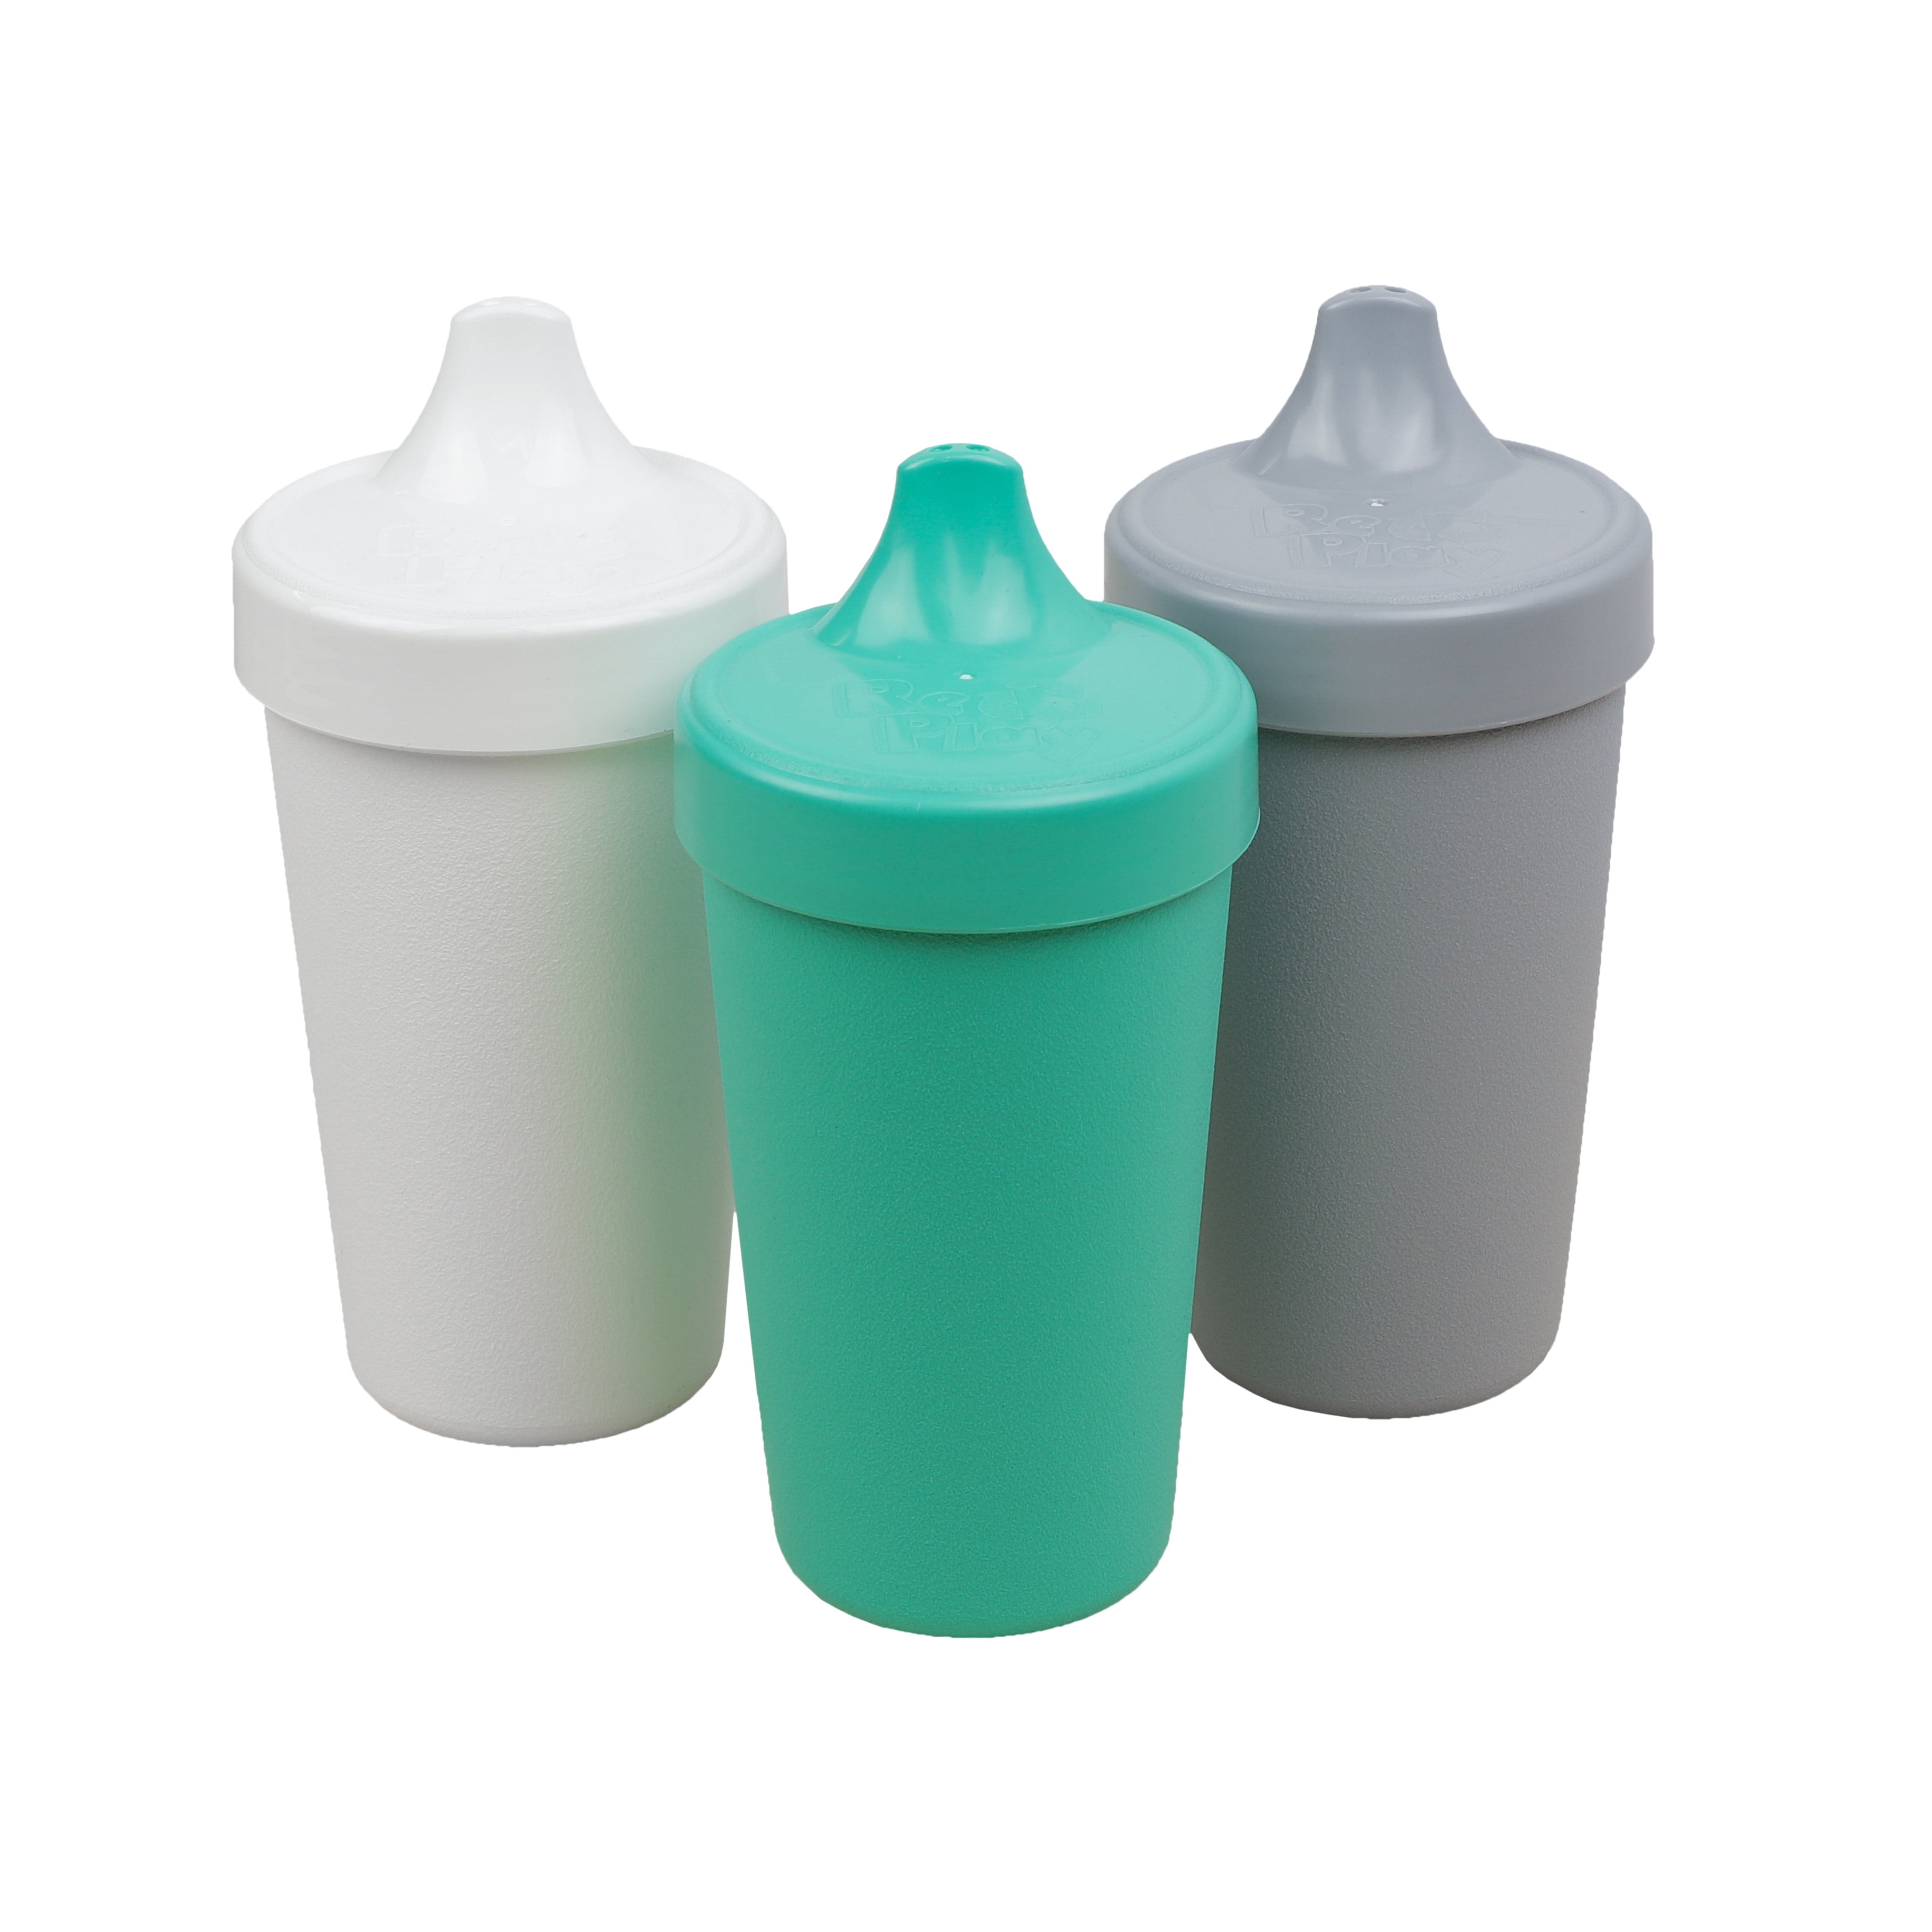 Re-Play Baby Sippy Cups for Toddlers, 3pk No Spill Sippy Cup, Sunbeam 